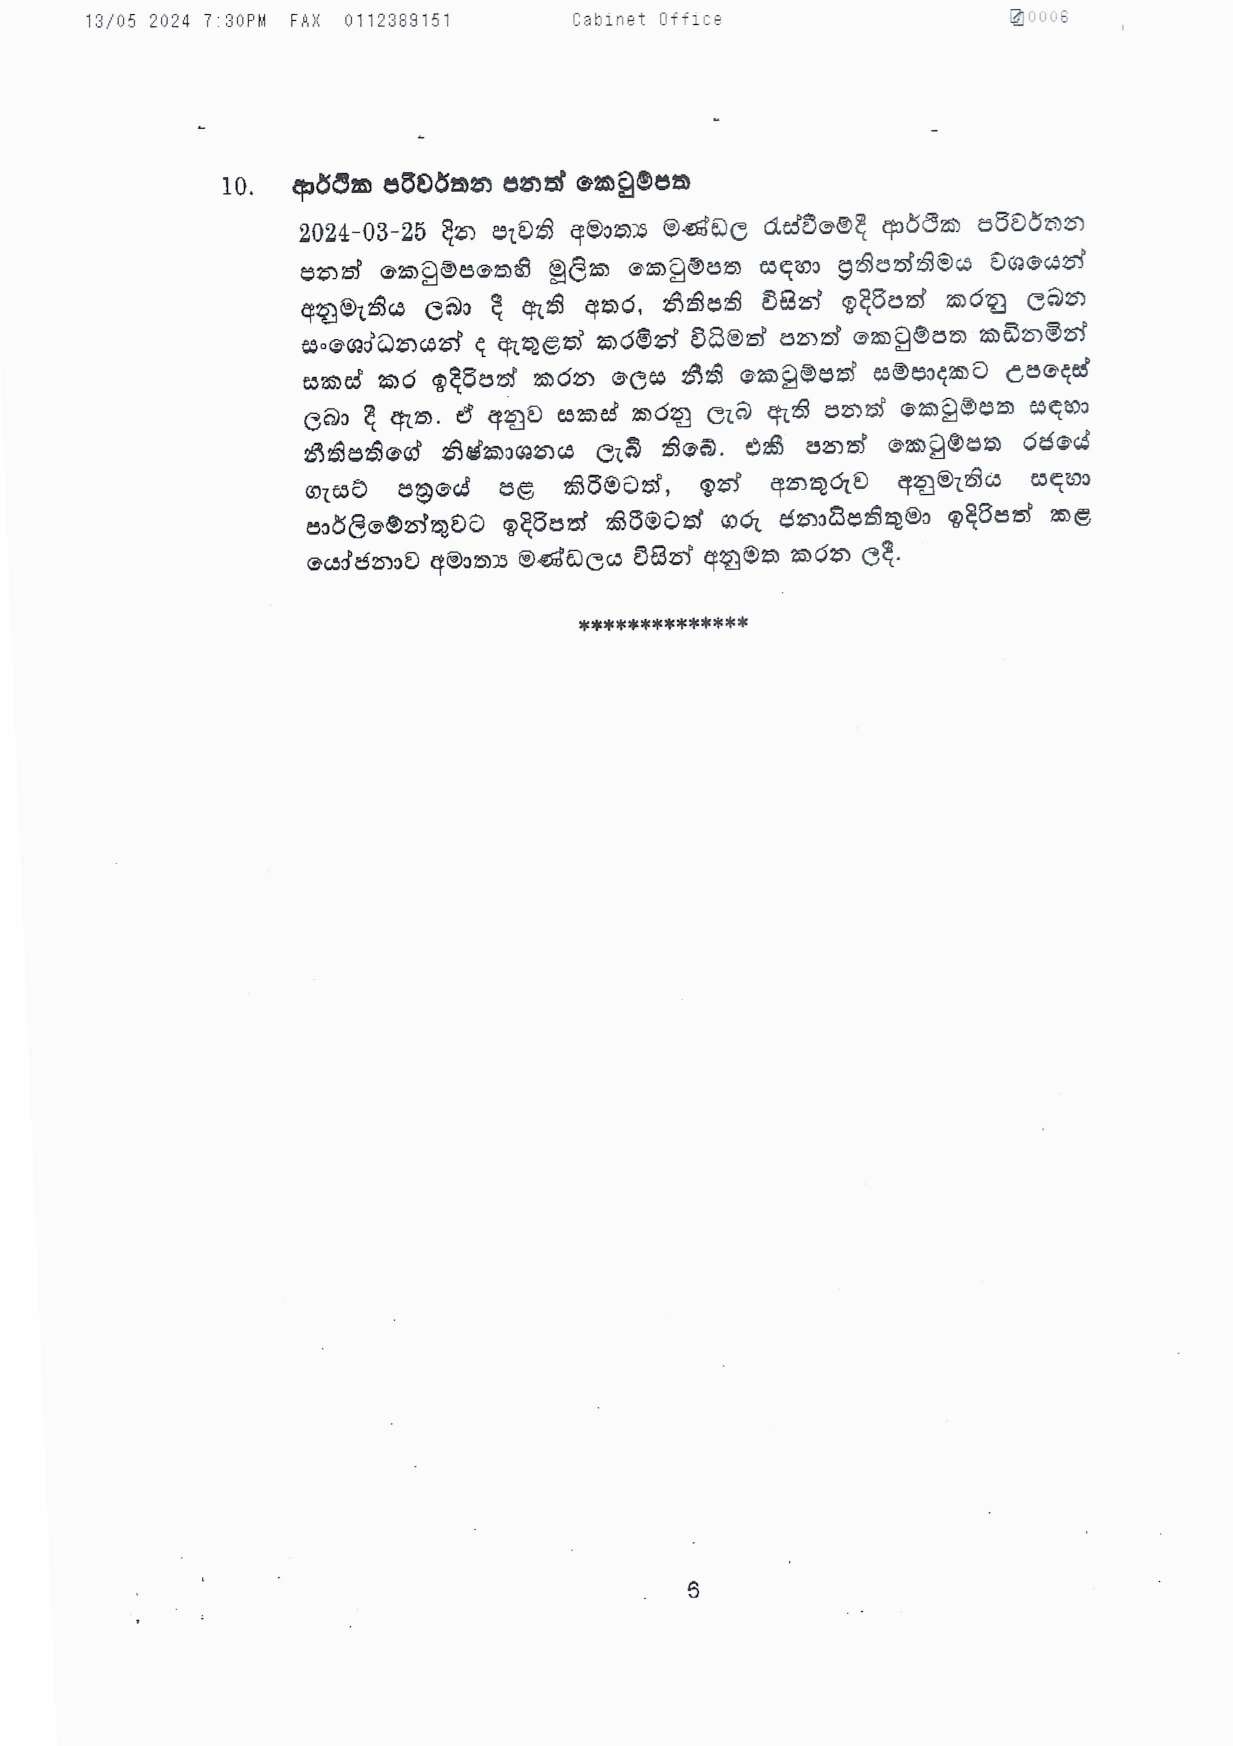 Cabinet Decisions on 13.05.2024 compressed page 00061